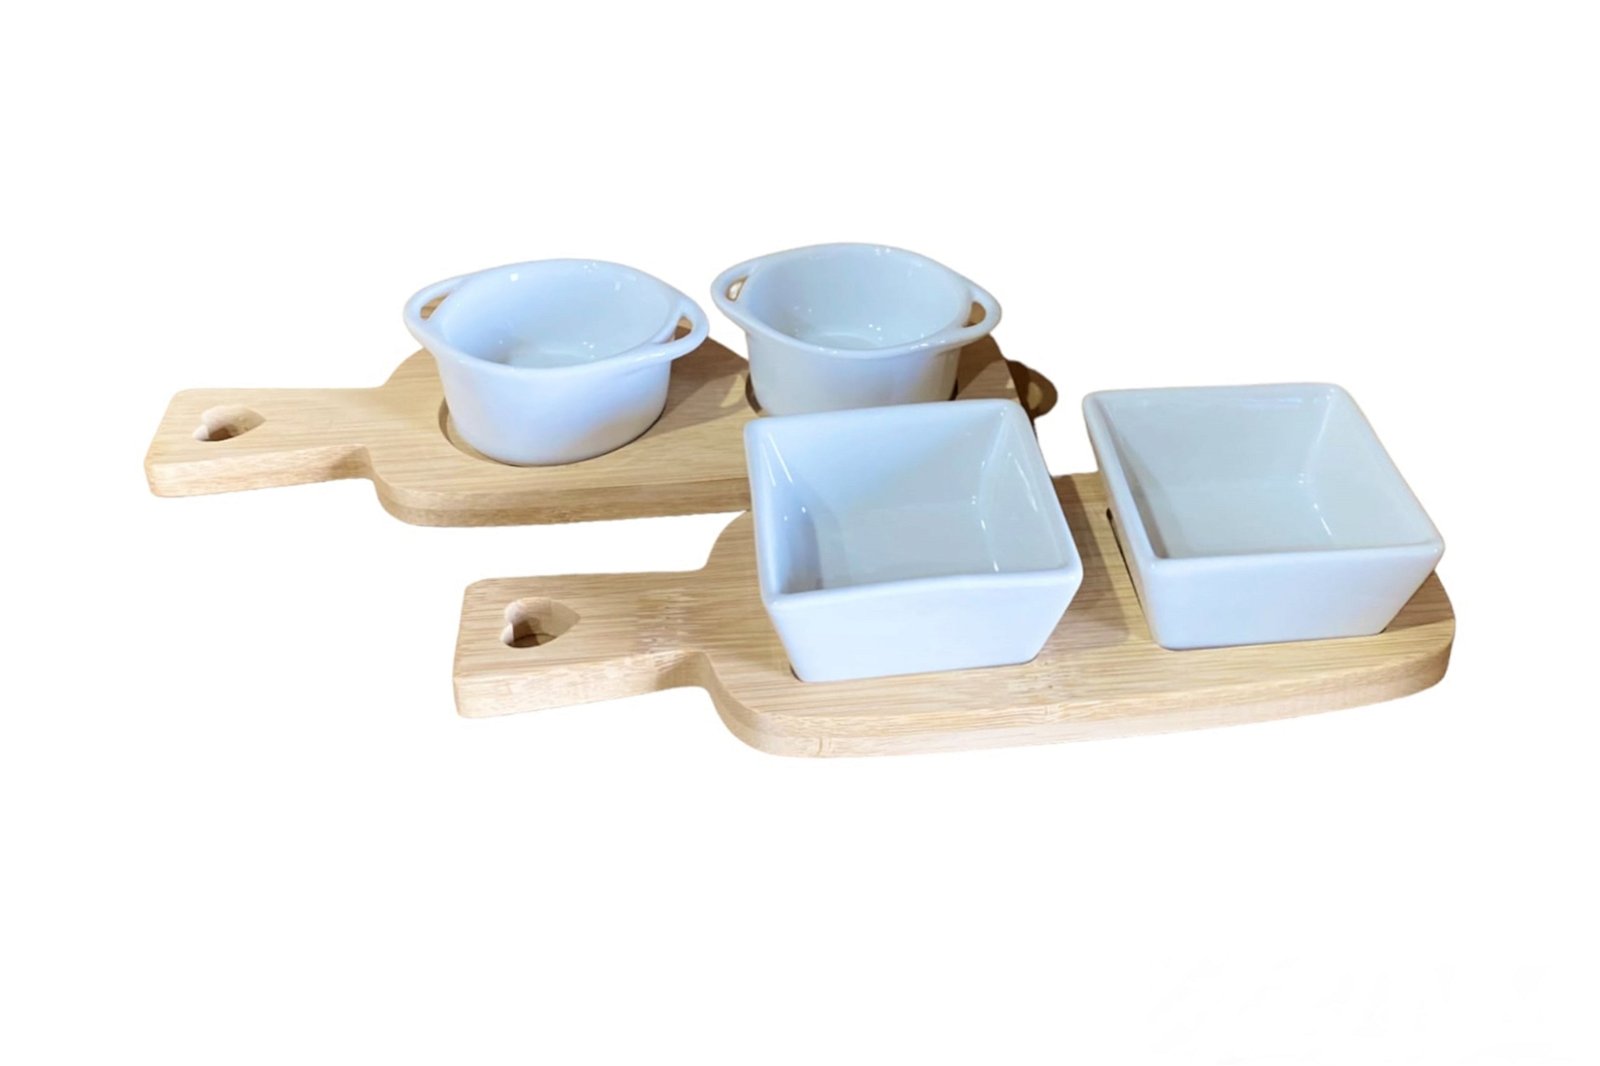 View Dip Dishes On Bamboo Tray information